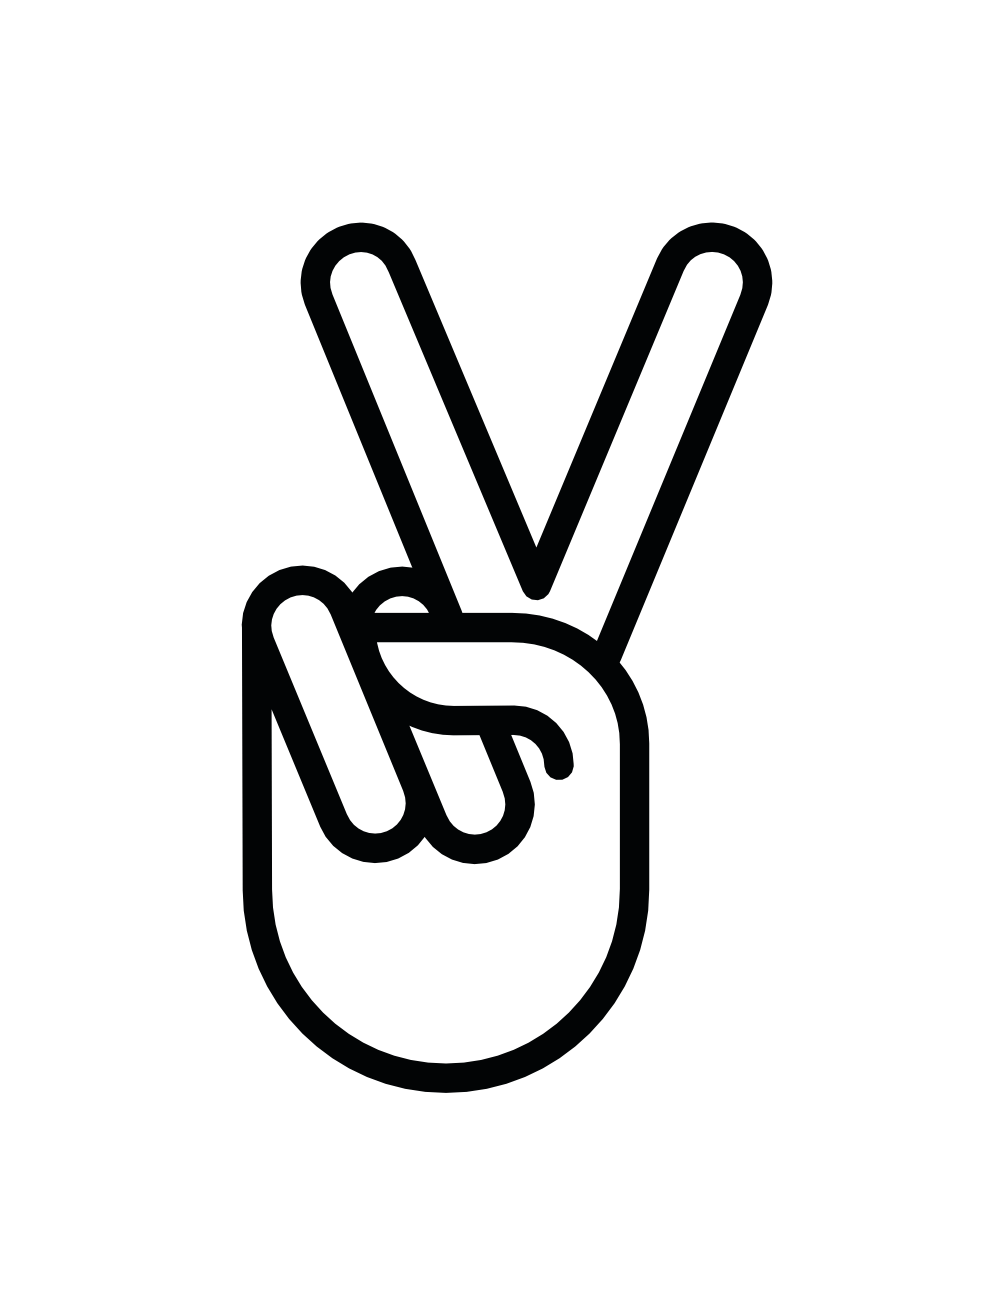 Peace Sign Logo - Image - Hand-peace-sign-drawing-hand peace sign fav cnd logo-999px ...